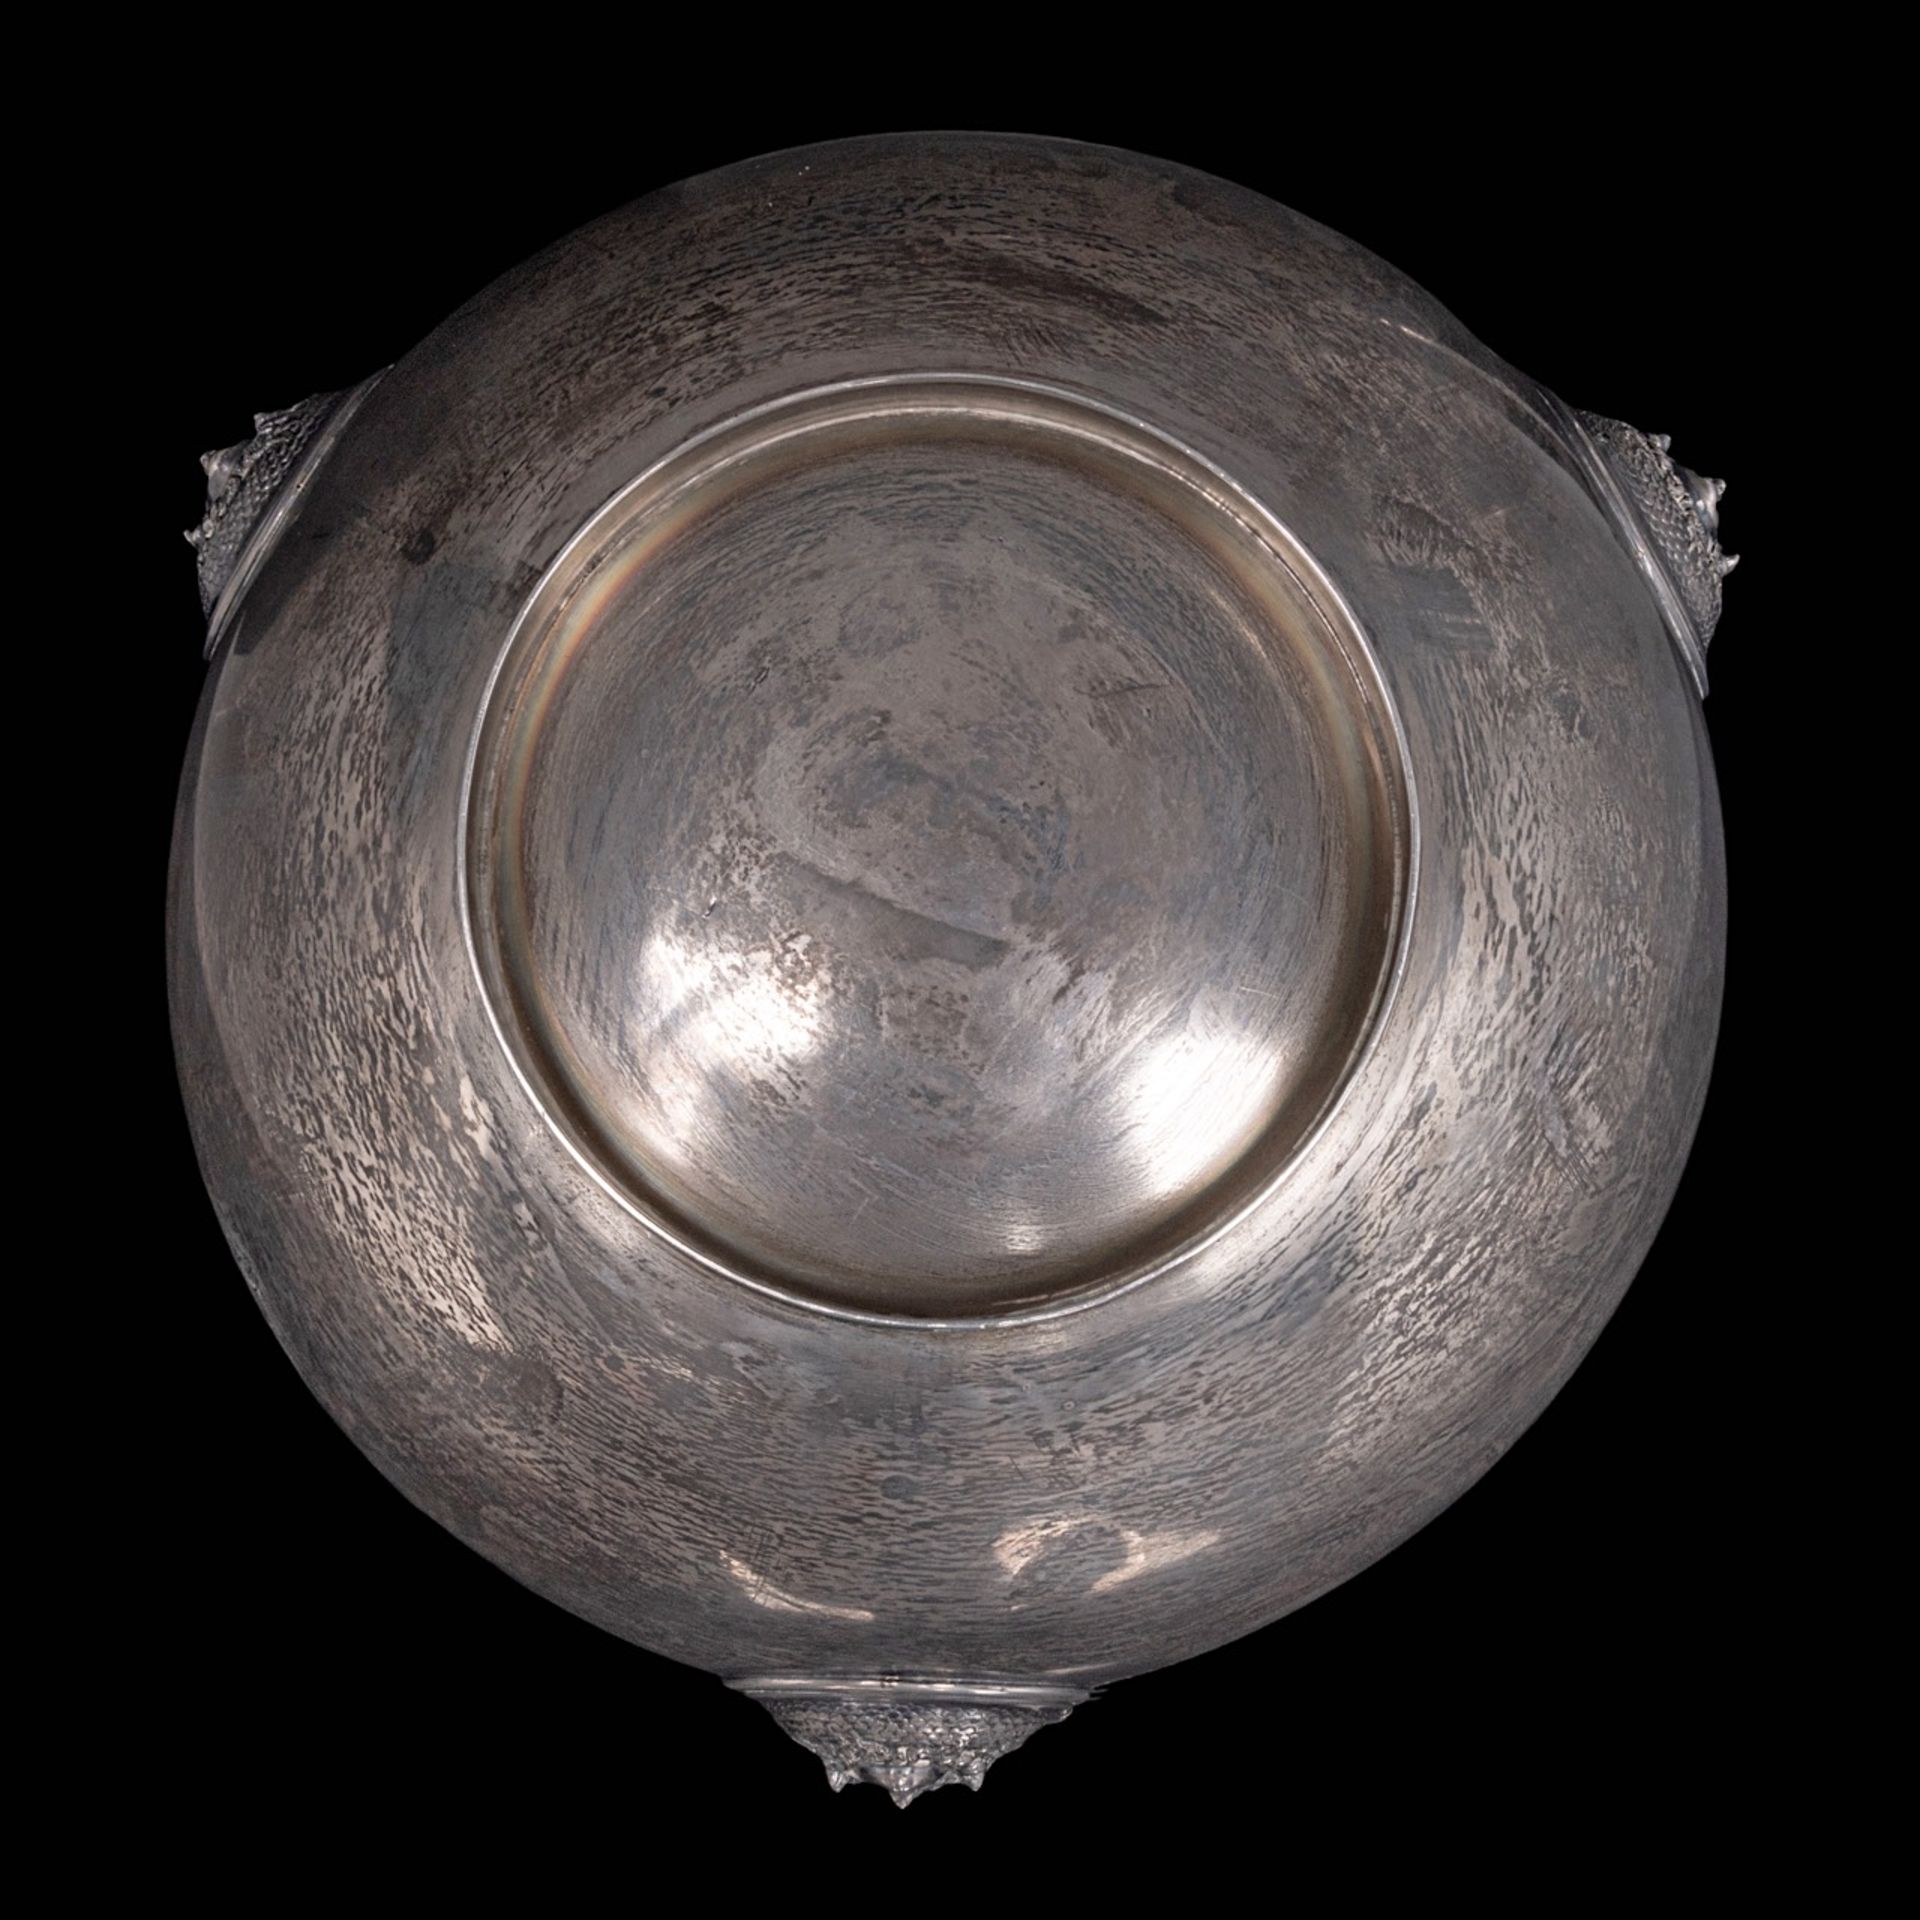 A Neoclassical English silver punchbowl, London hallmarks, year letter E (1900-1901), maker's mark J - Image 6 of 8